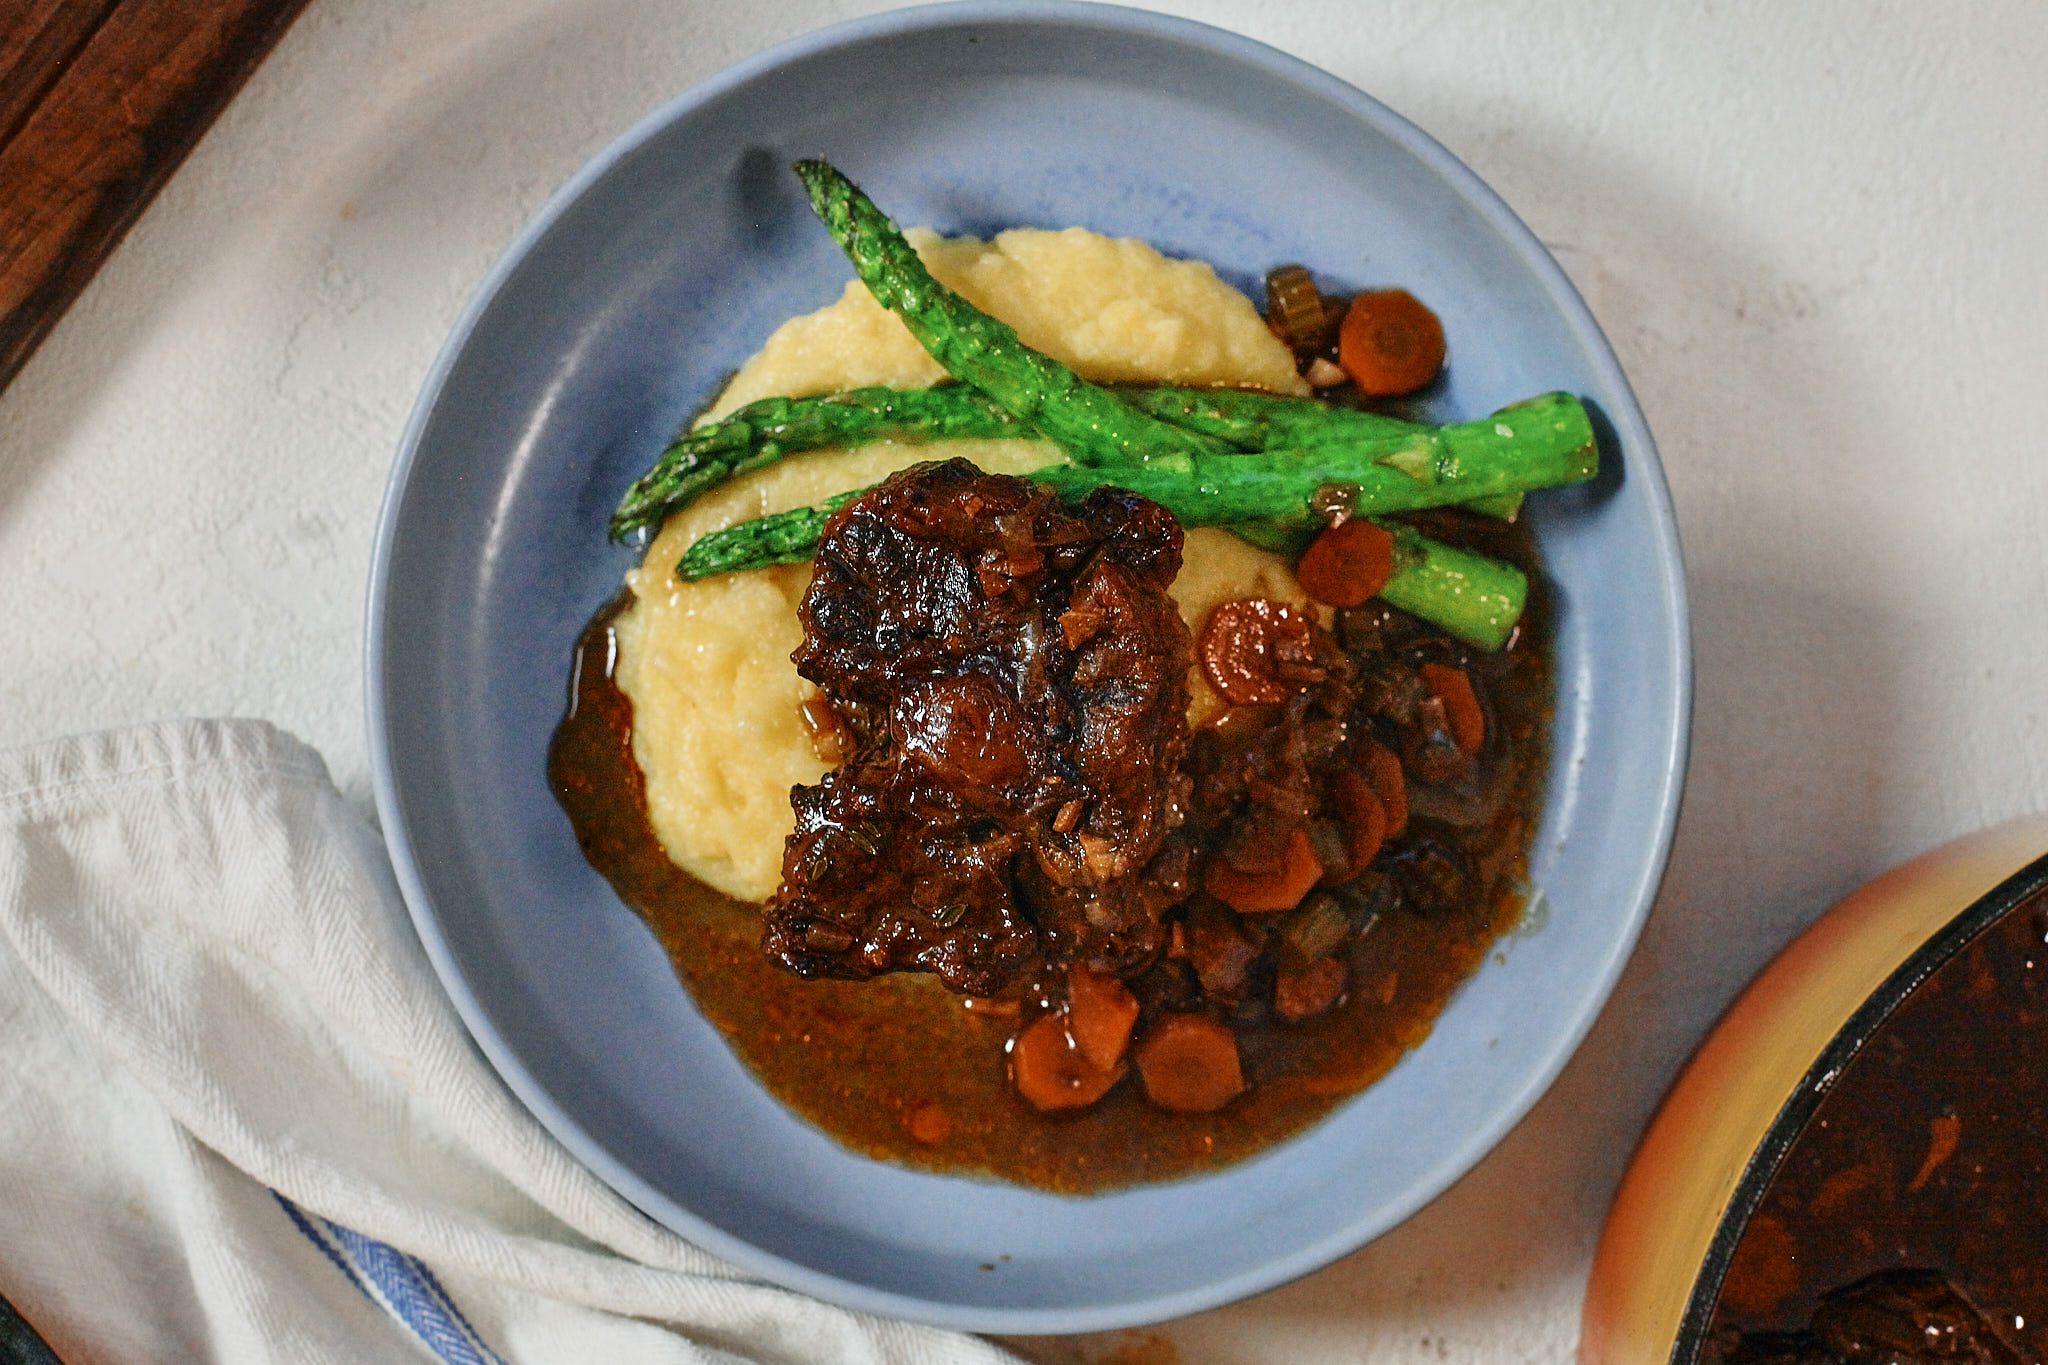 braised oxtail over a bed of polenta with asparagus